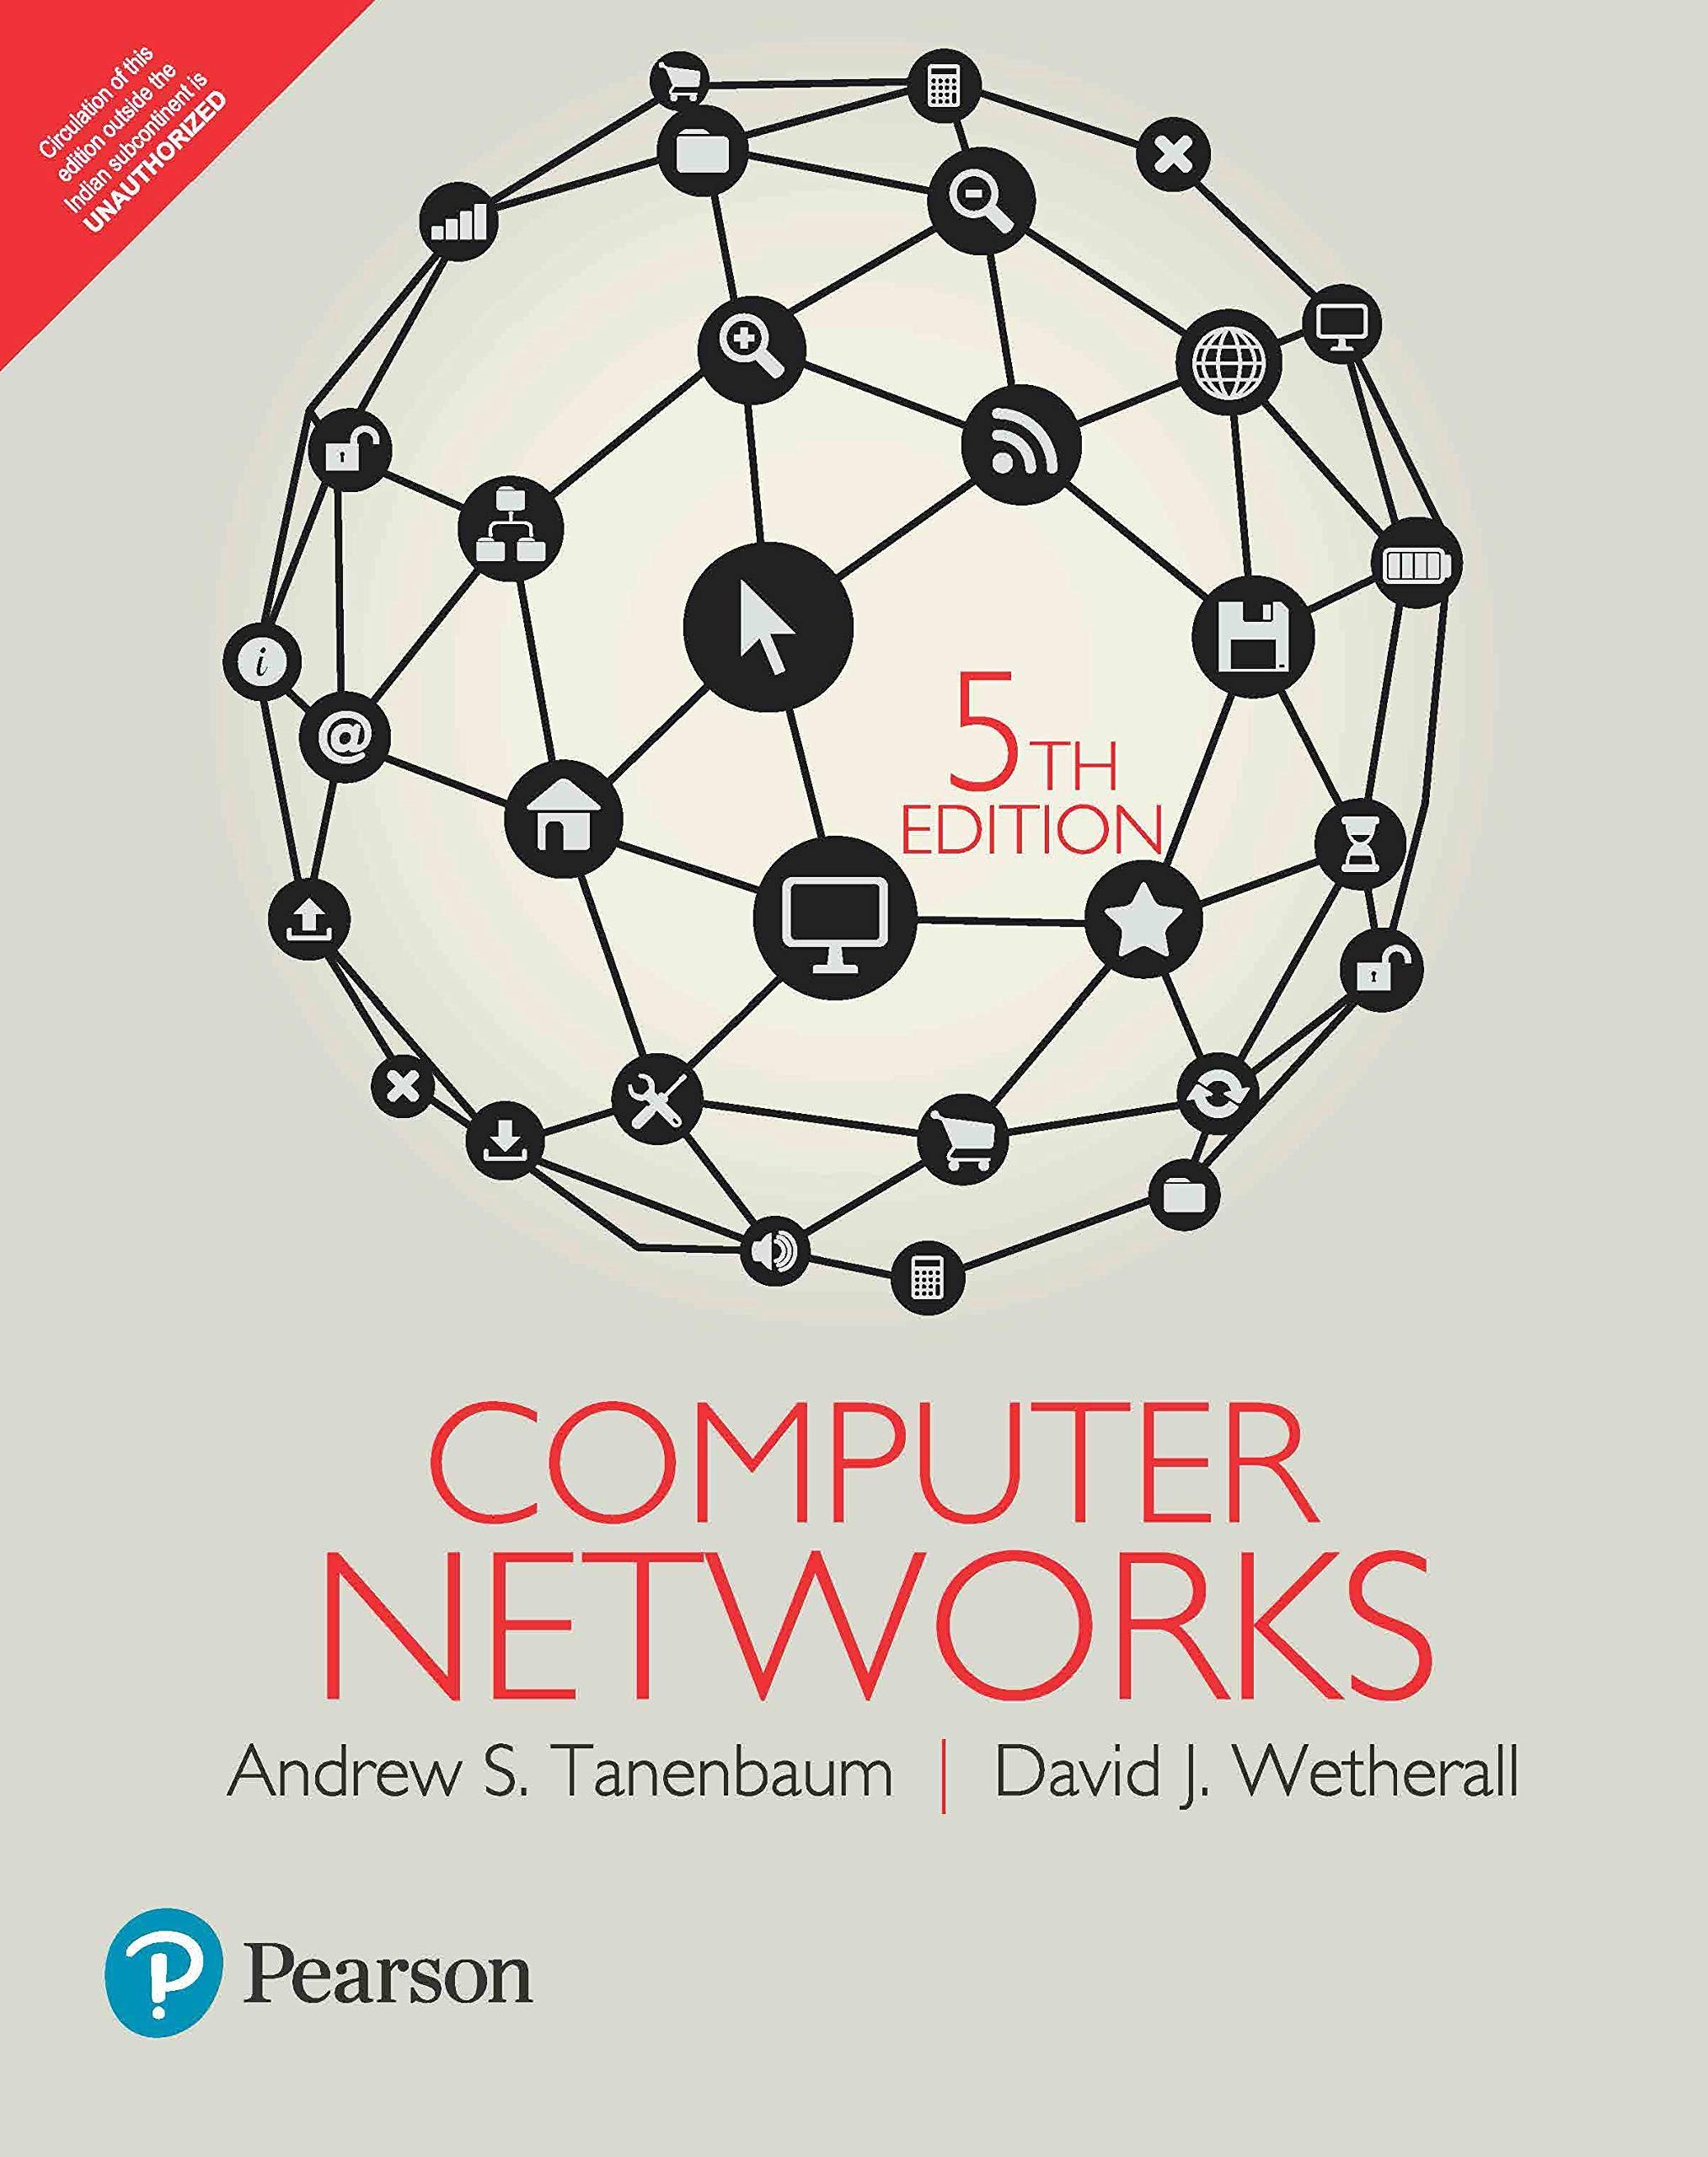 Routemybook - Buy Computer Networks by Andrew S.Tanenbaum, David J ...